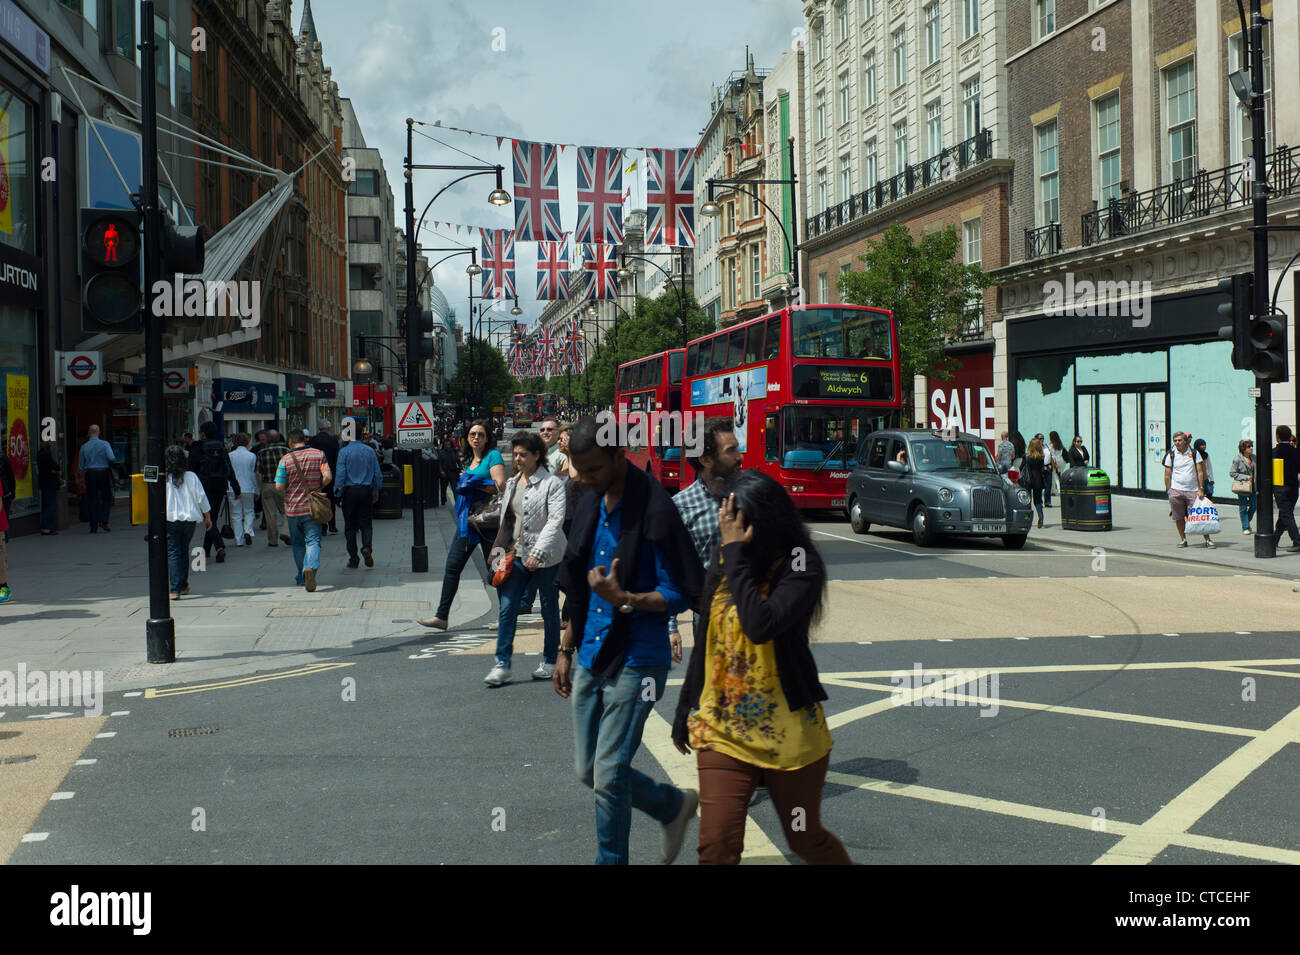 Shoppers in Oxford Street, London, West End, England UK Stock Photo